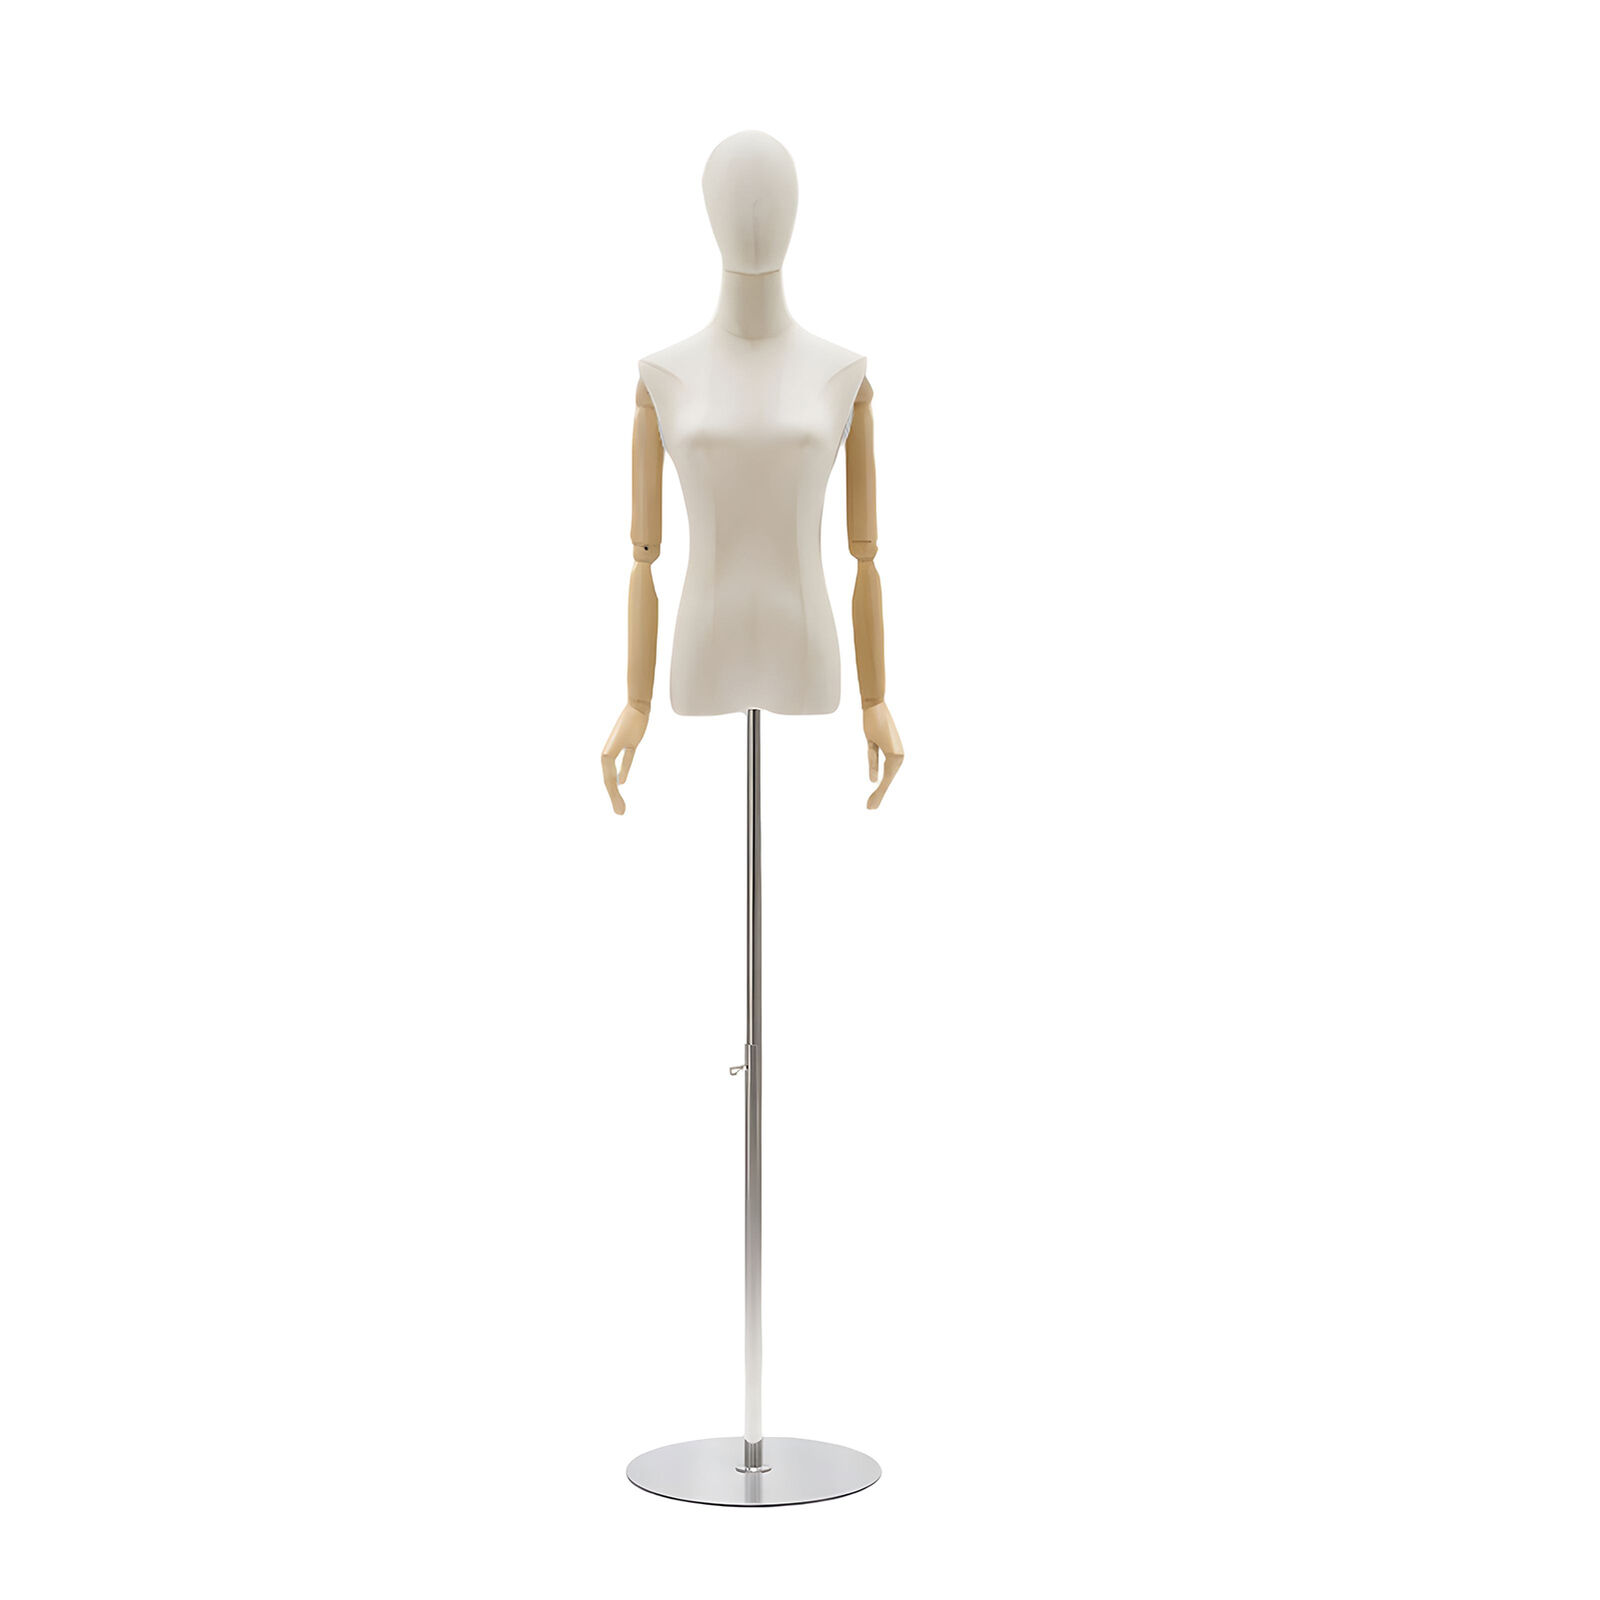 Female Mannequin Torso Dress Clothing Form Display Body Tripod Stand Silver Gold